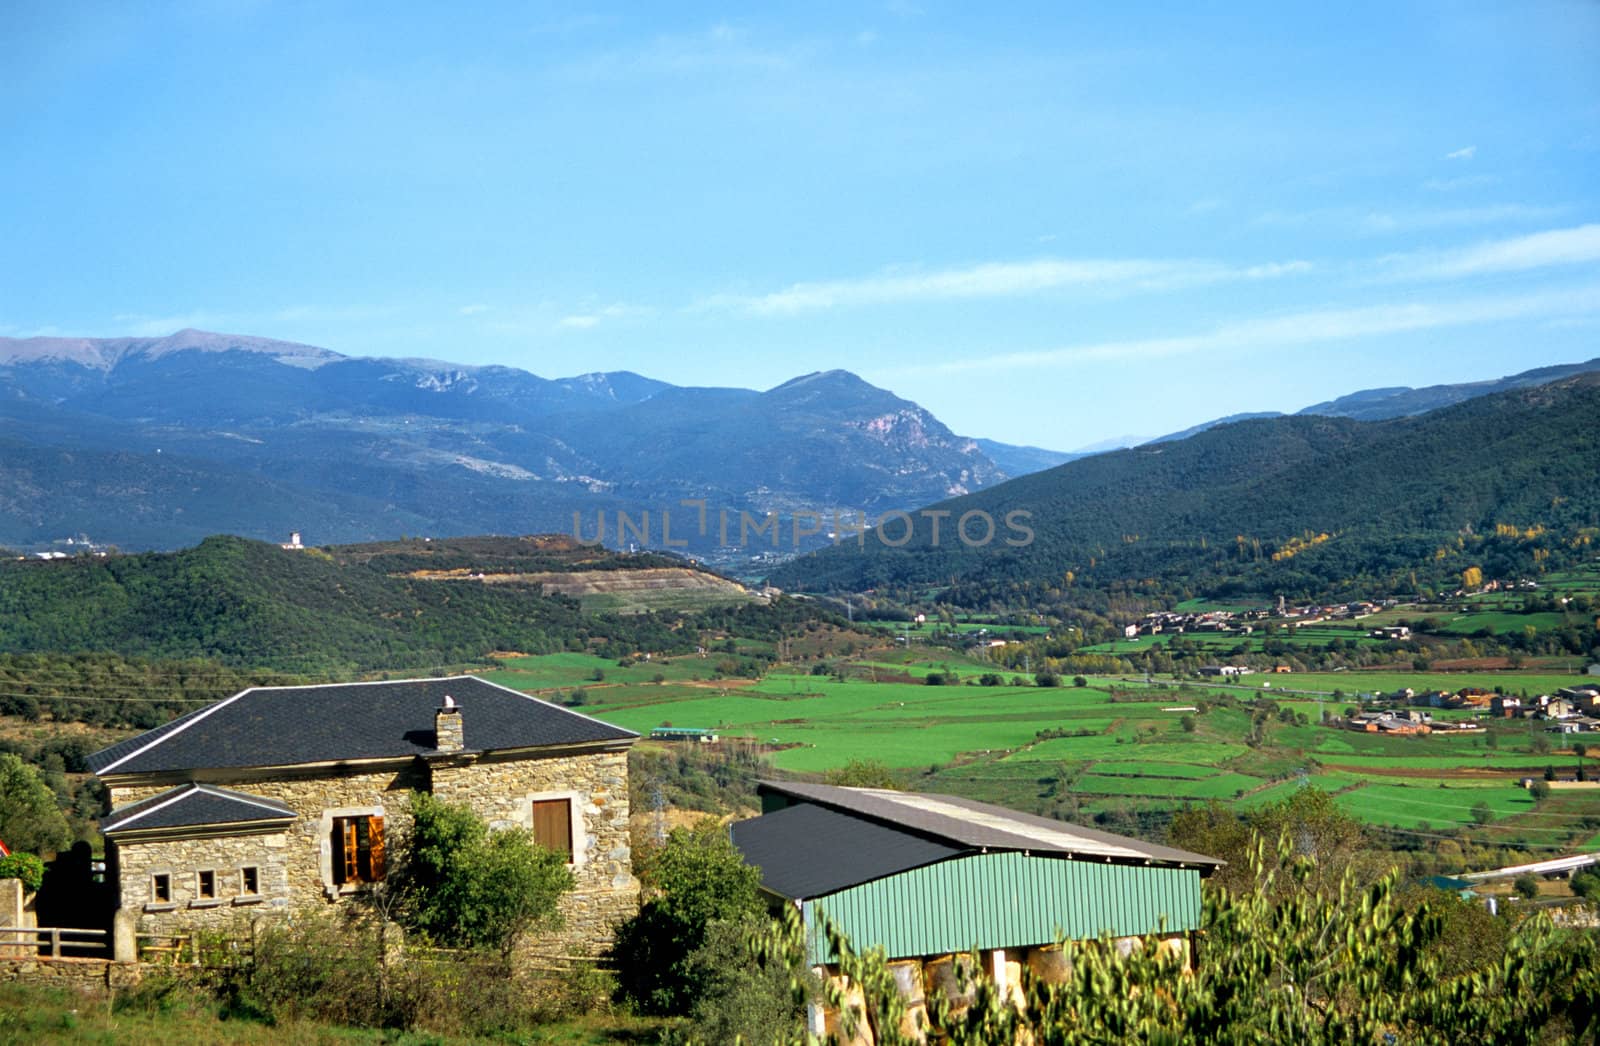 A stone farmhouse sits in a valley in the Pyrenees mountain range in Spain.